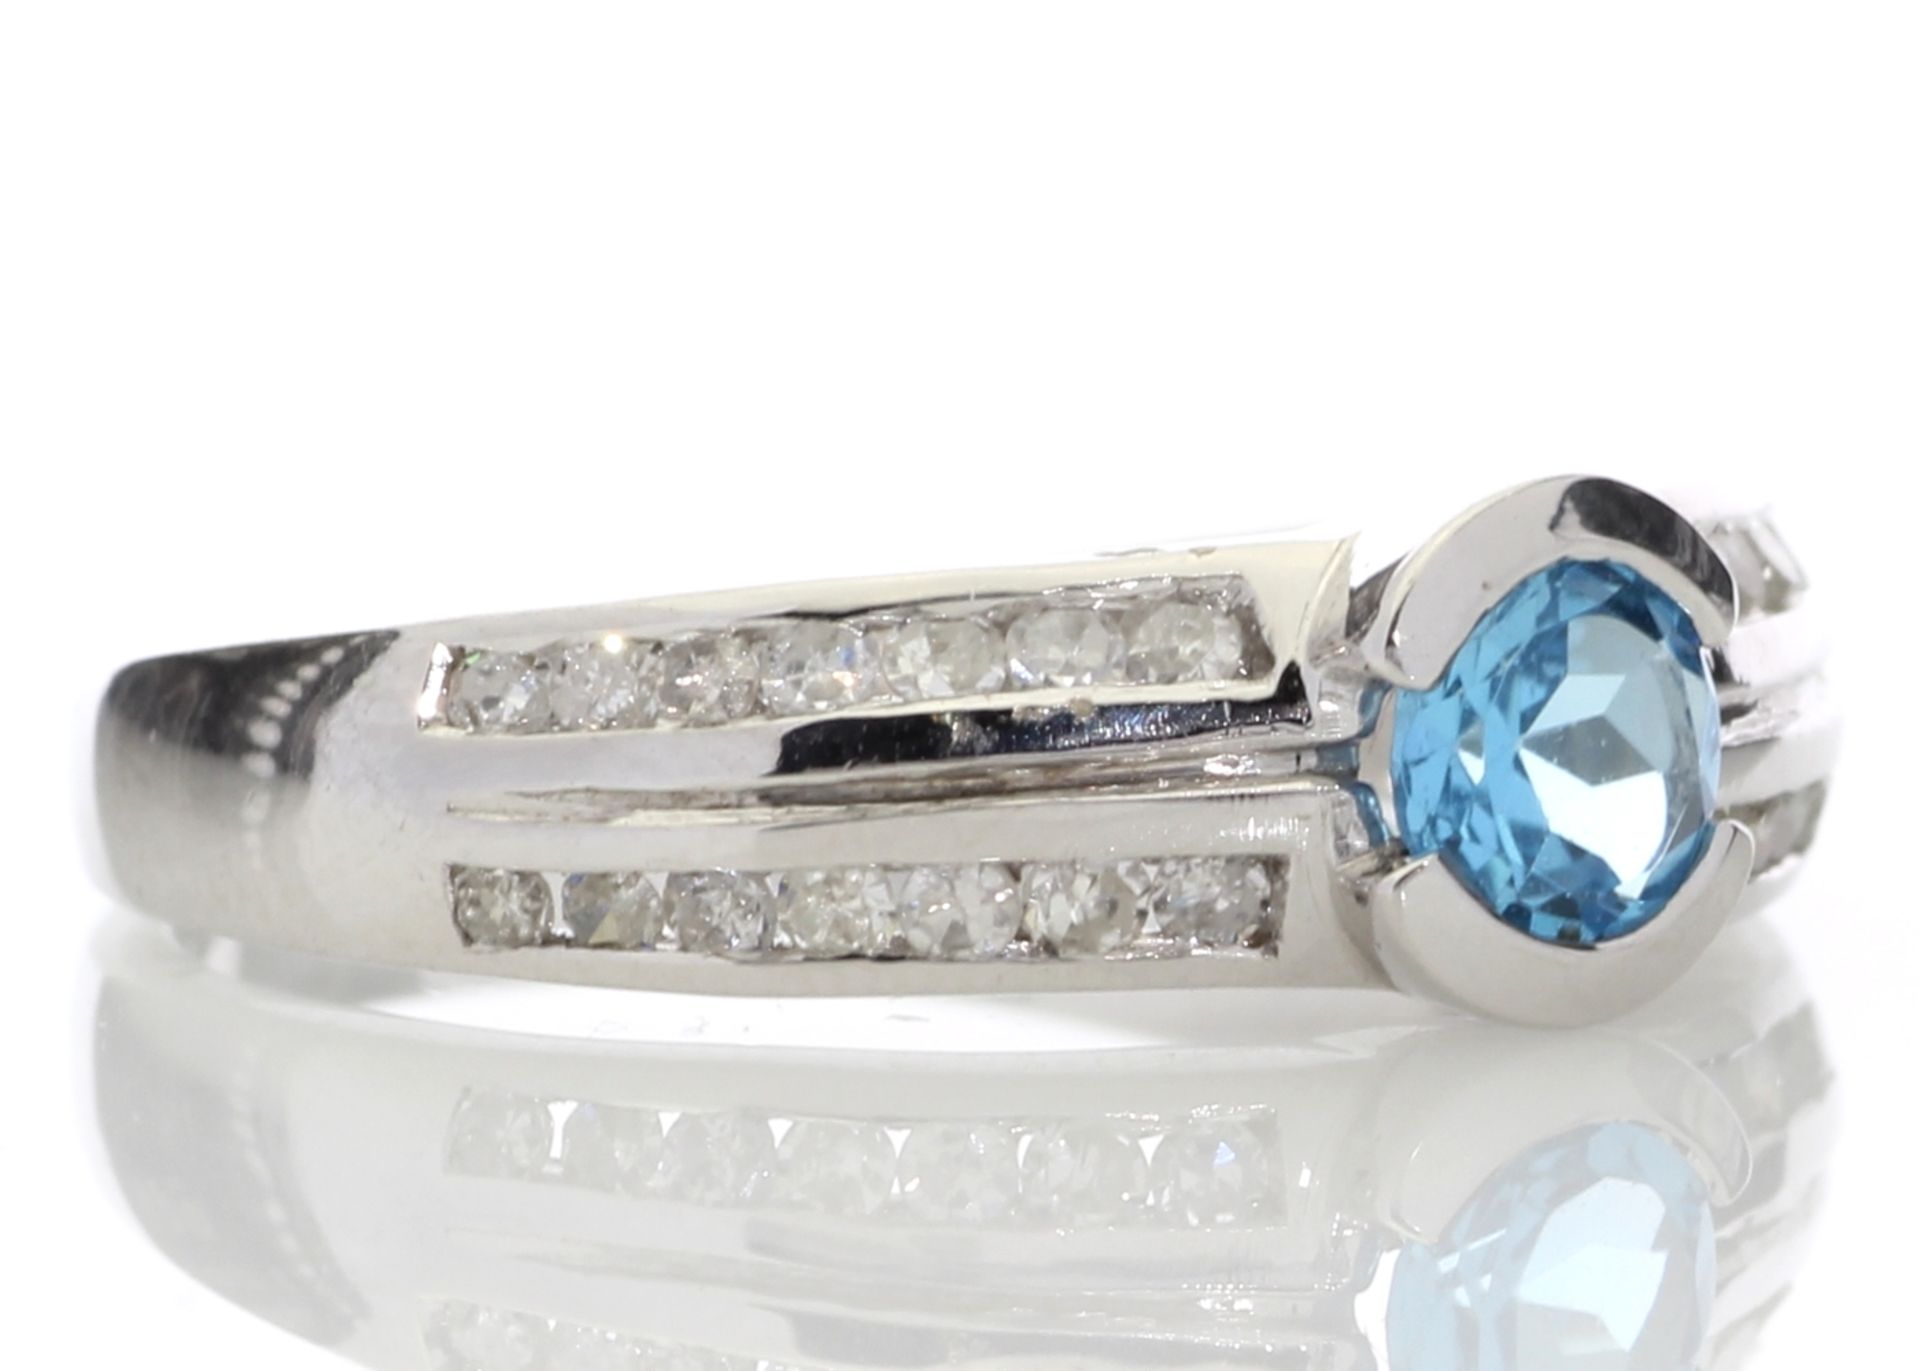 9ct White Gold Double Channel Set Diamond and Blue Topaz Ring 0.36 Carats - Image 4 of 5